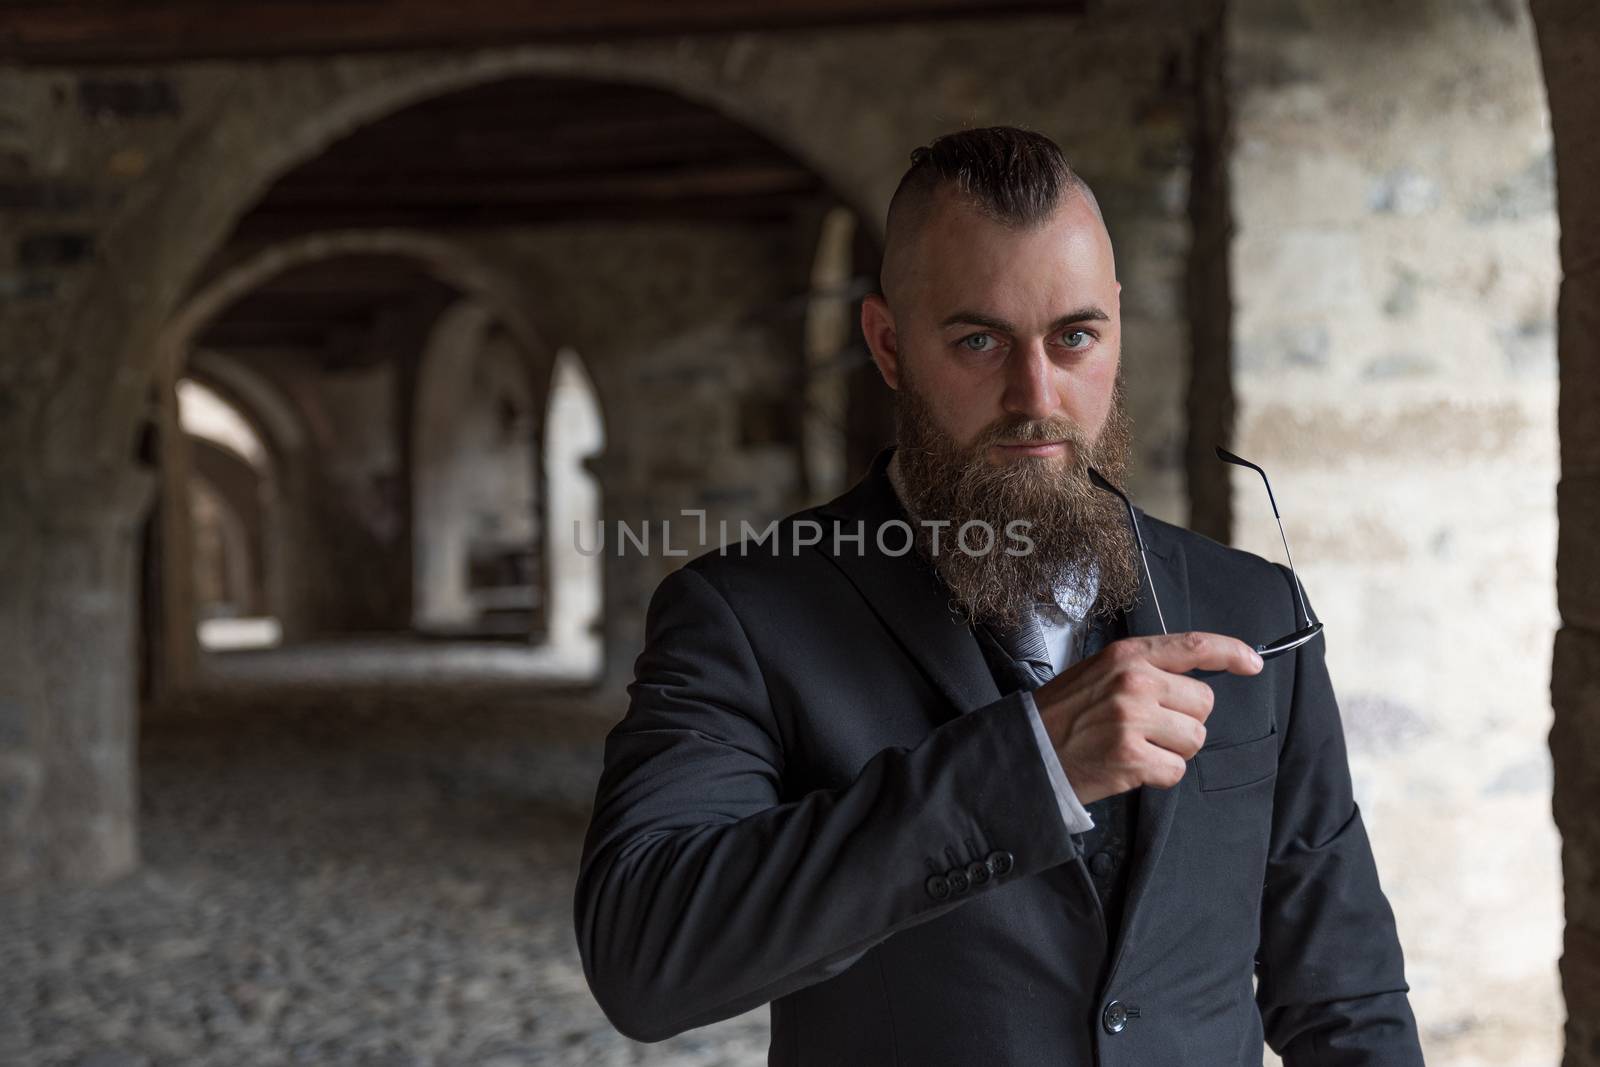 Man with short hair and long beard holding sunglasses by brambillasimone